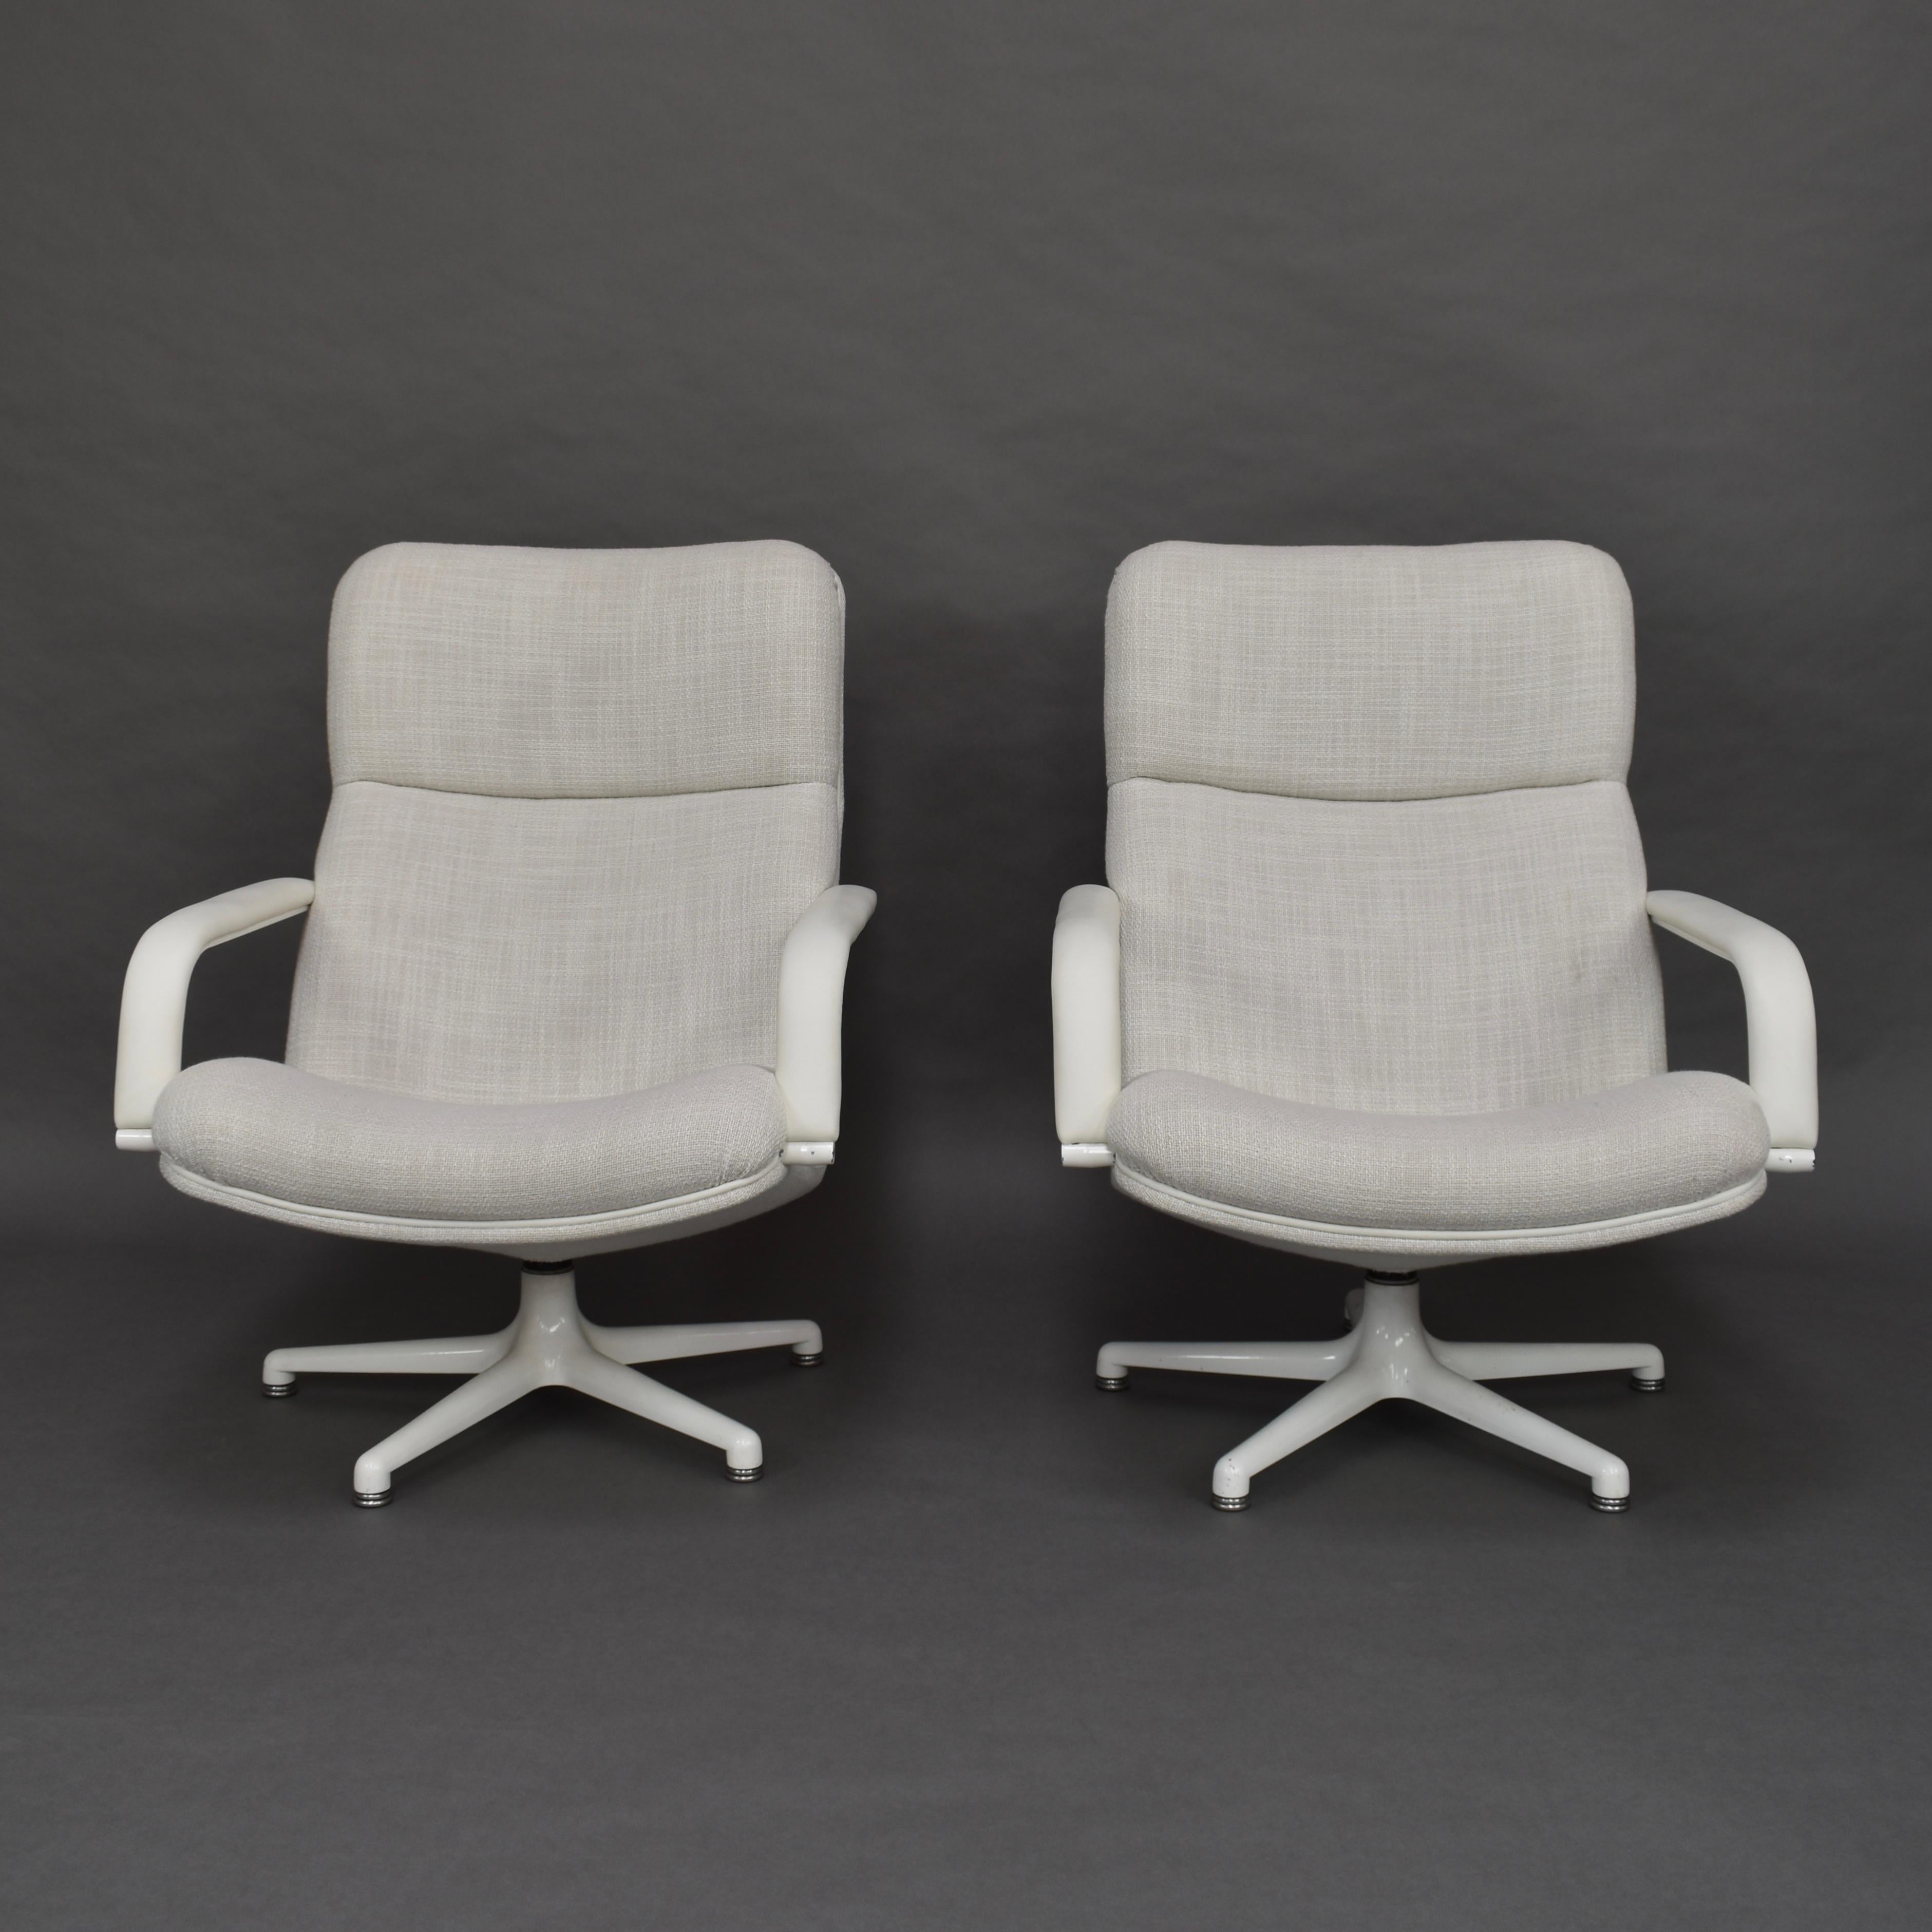 Pair of F154 swivel lounge chairs designed in 1985 by Geoffrey Harcourt for Artifort.

Manufacturer: Artifort

Designer: Geoffrey Harcourt

Country: The Netherlands

Model: F154 swivel lounge chair

Material: Fabric / Faux leather /